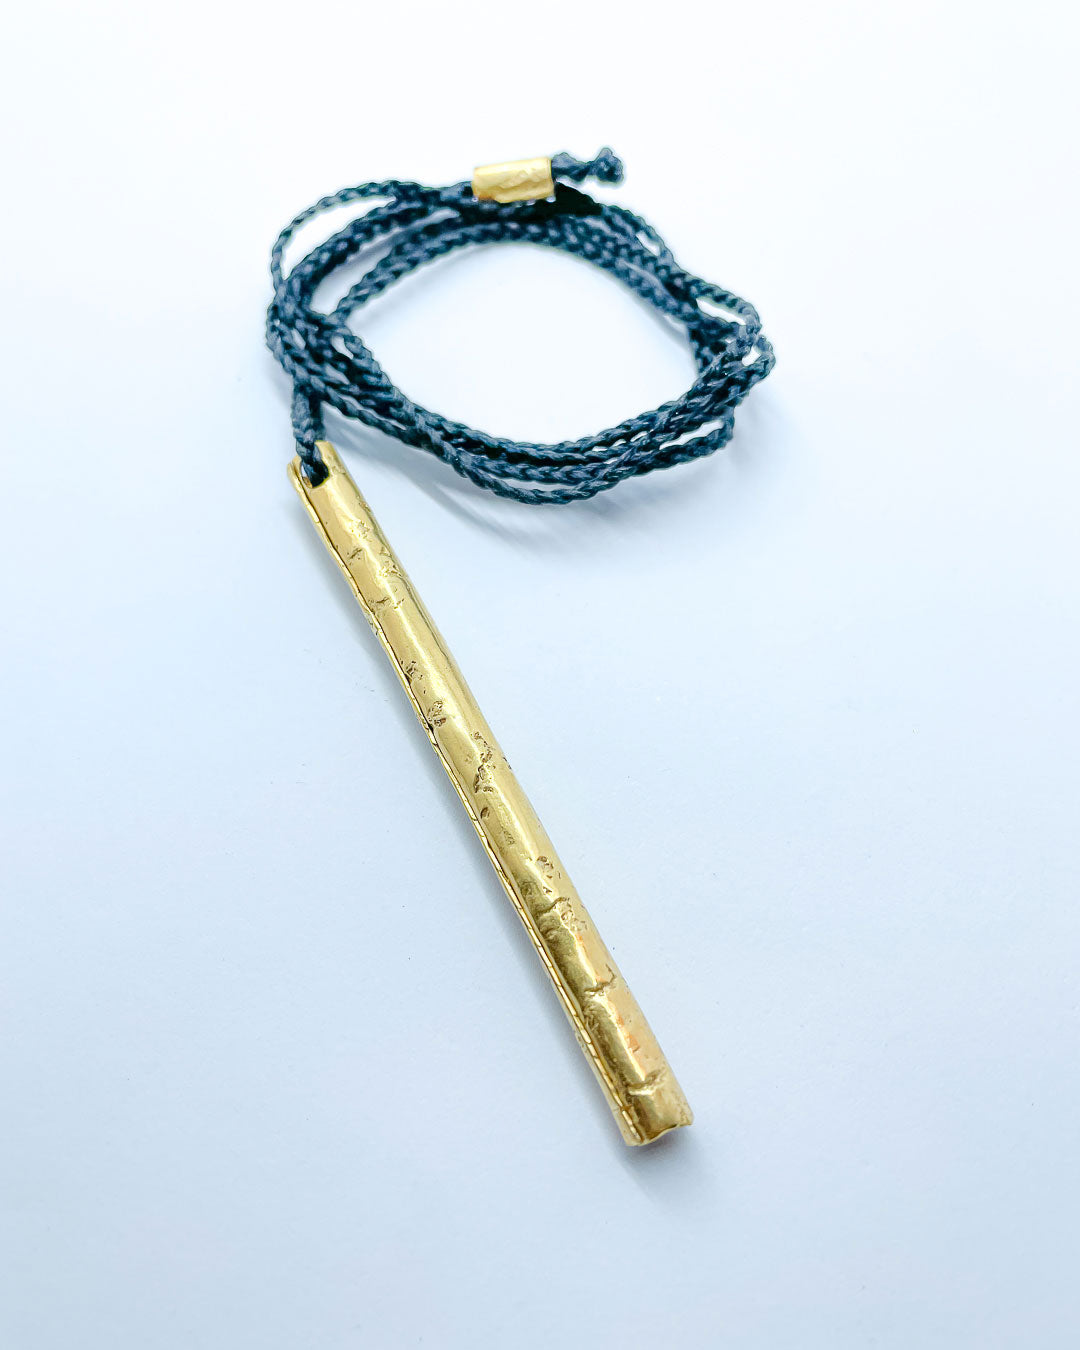 A gold pendant hung from a black plaited cord